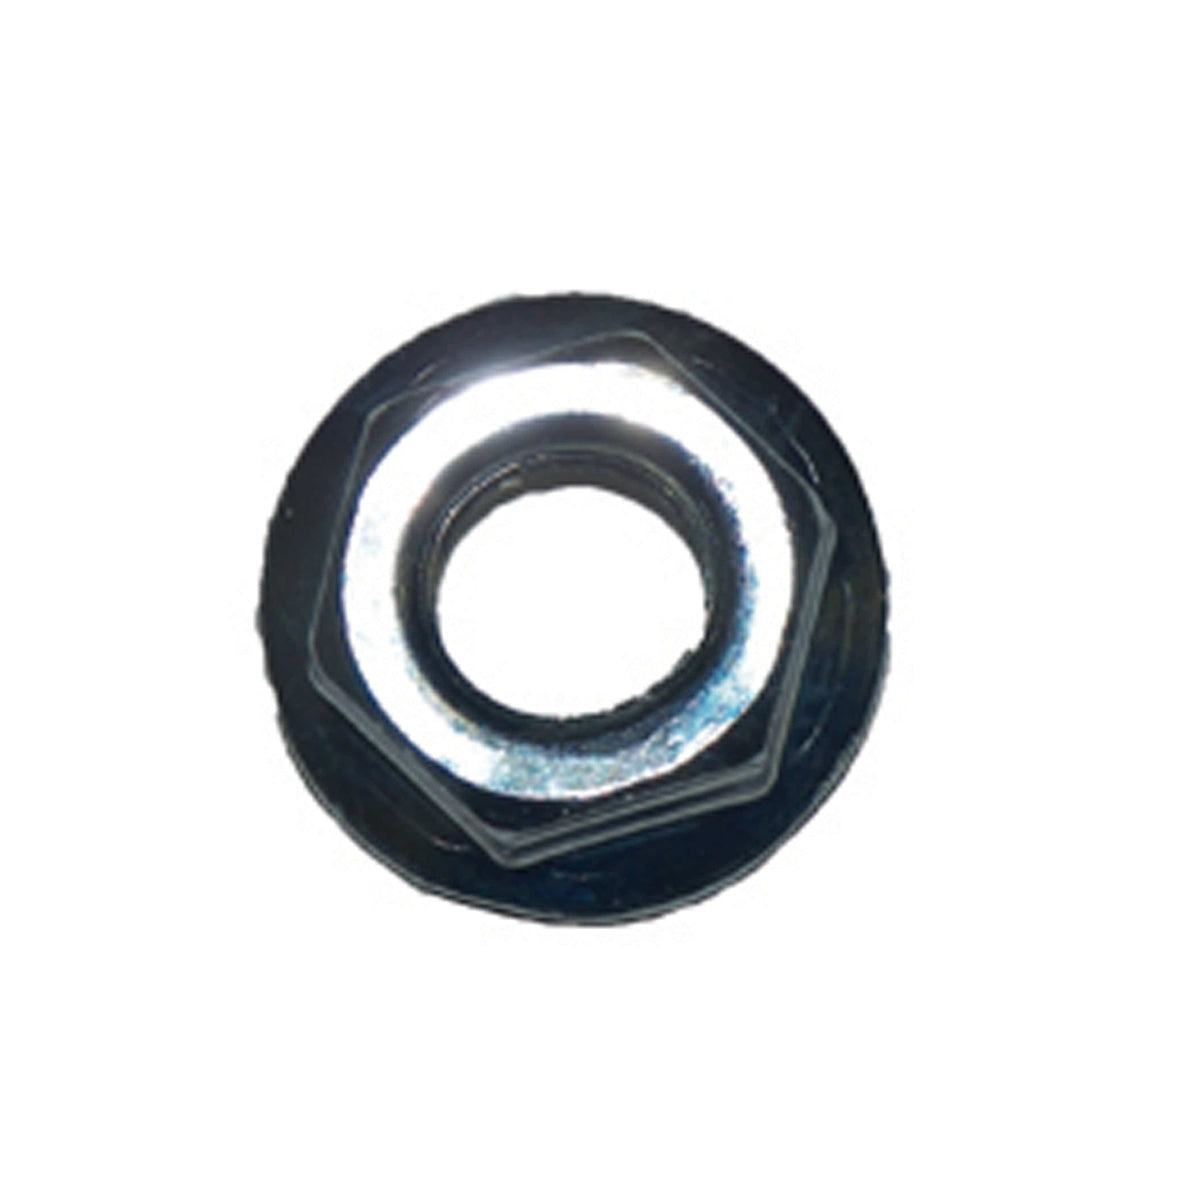 AP Products Qualifies for Free Shipping AP Products 1/2-20 UNF 2B Cap Nut 5-pk #014-127146